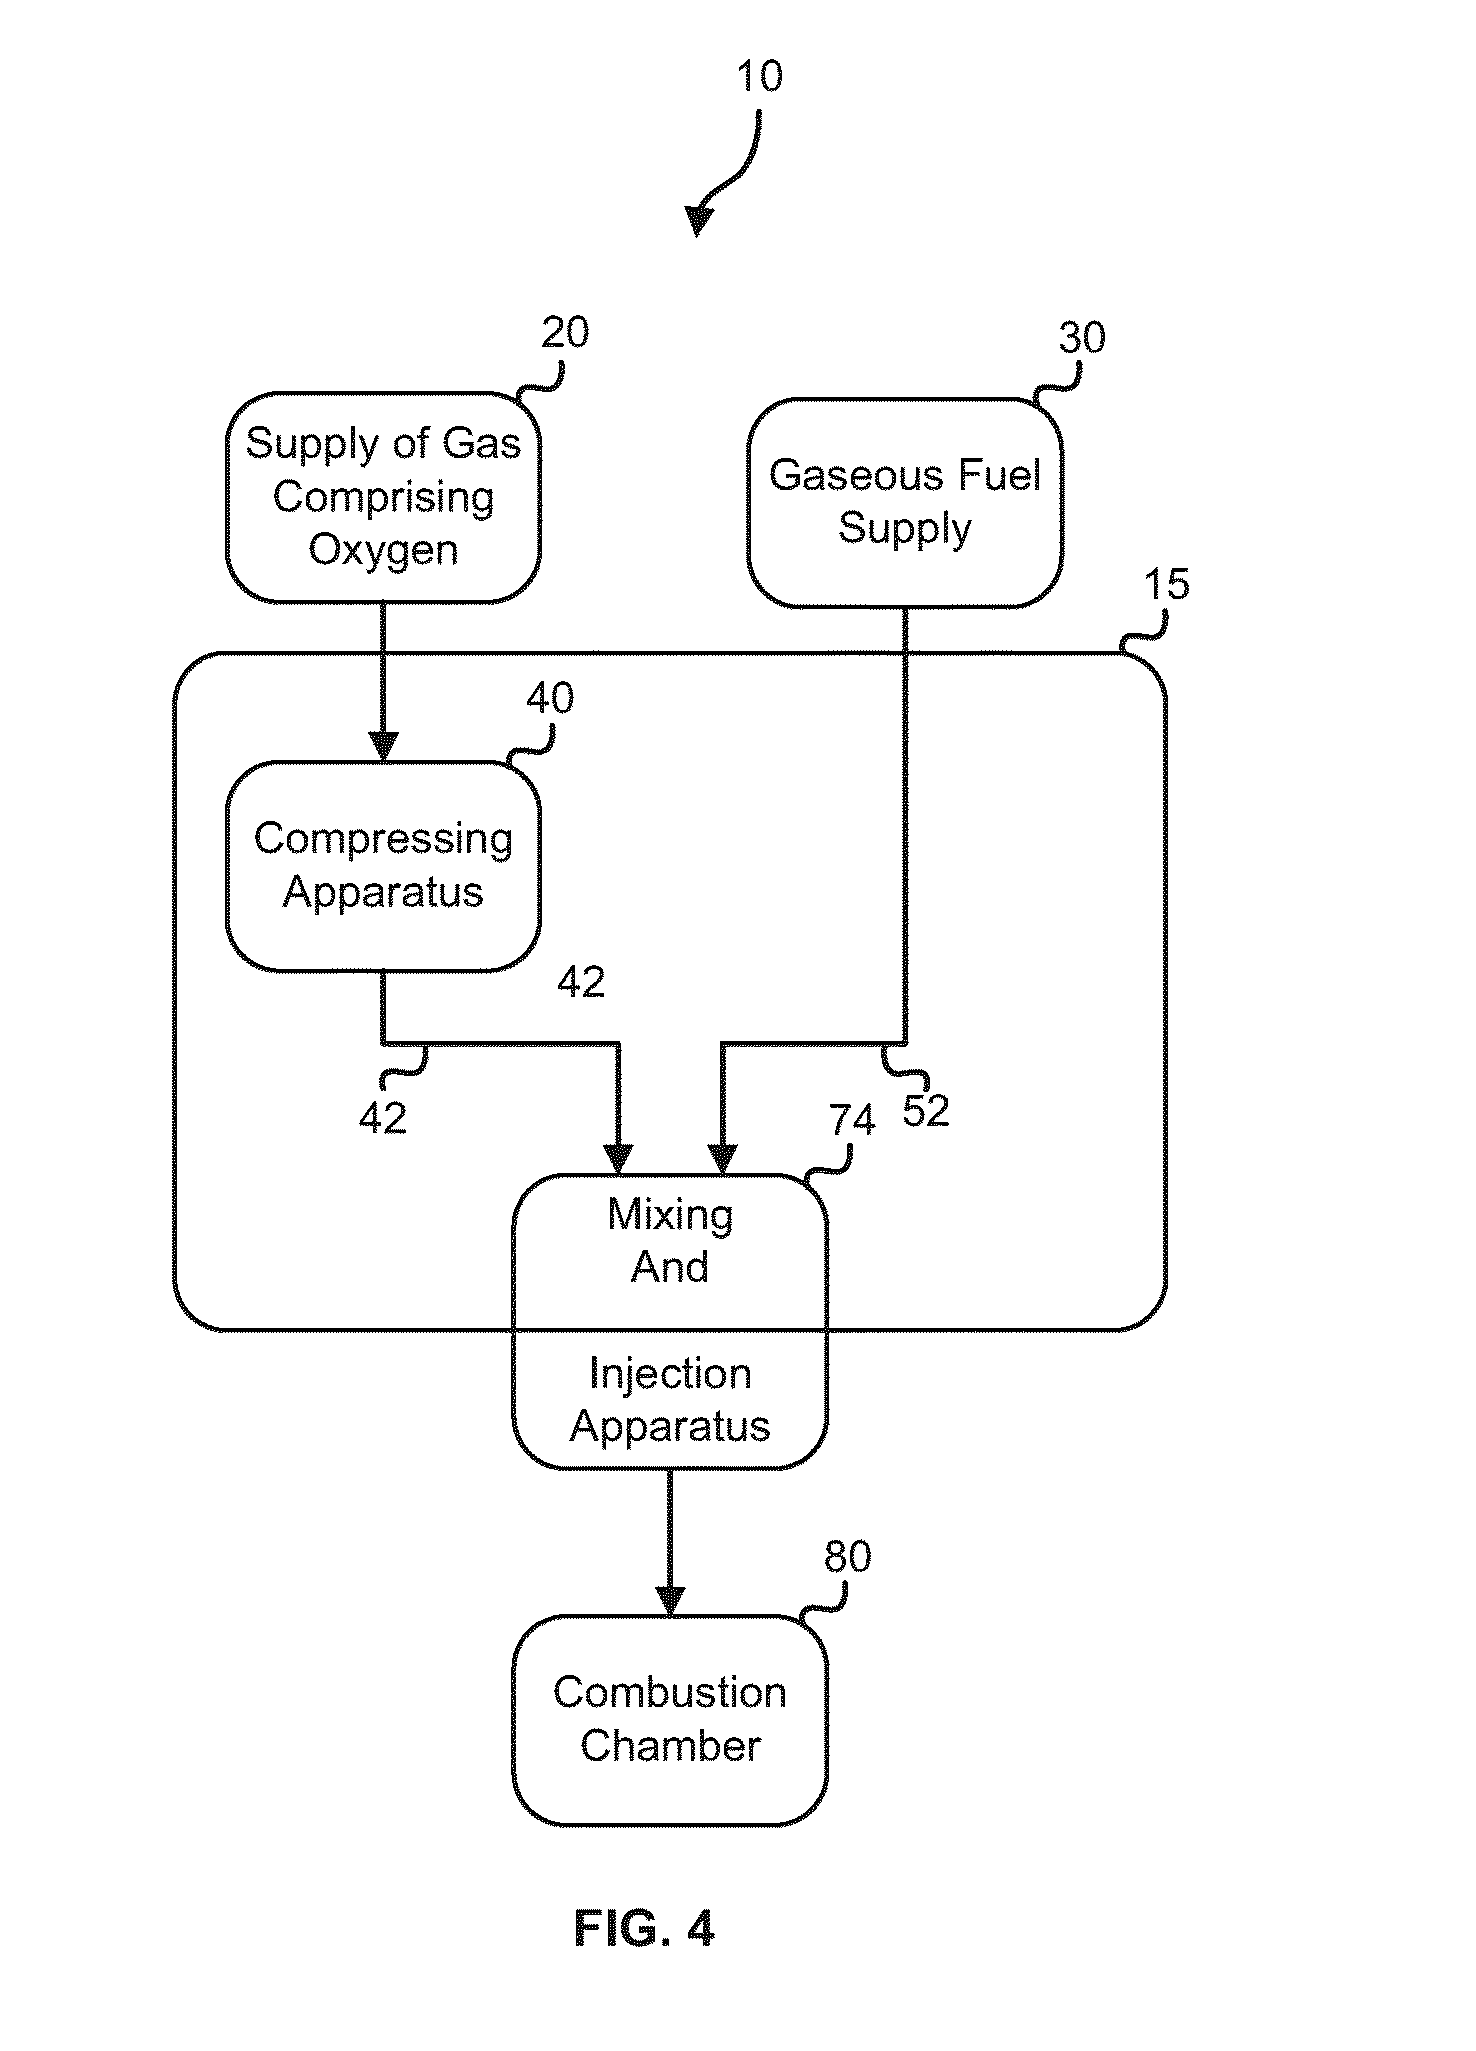 Air-Enriched Gaseous Fuel Direct Injection For An Internal Combustion Engine